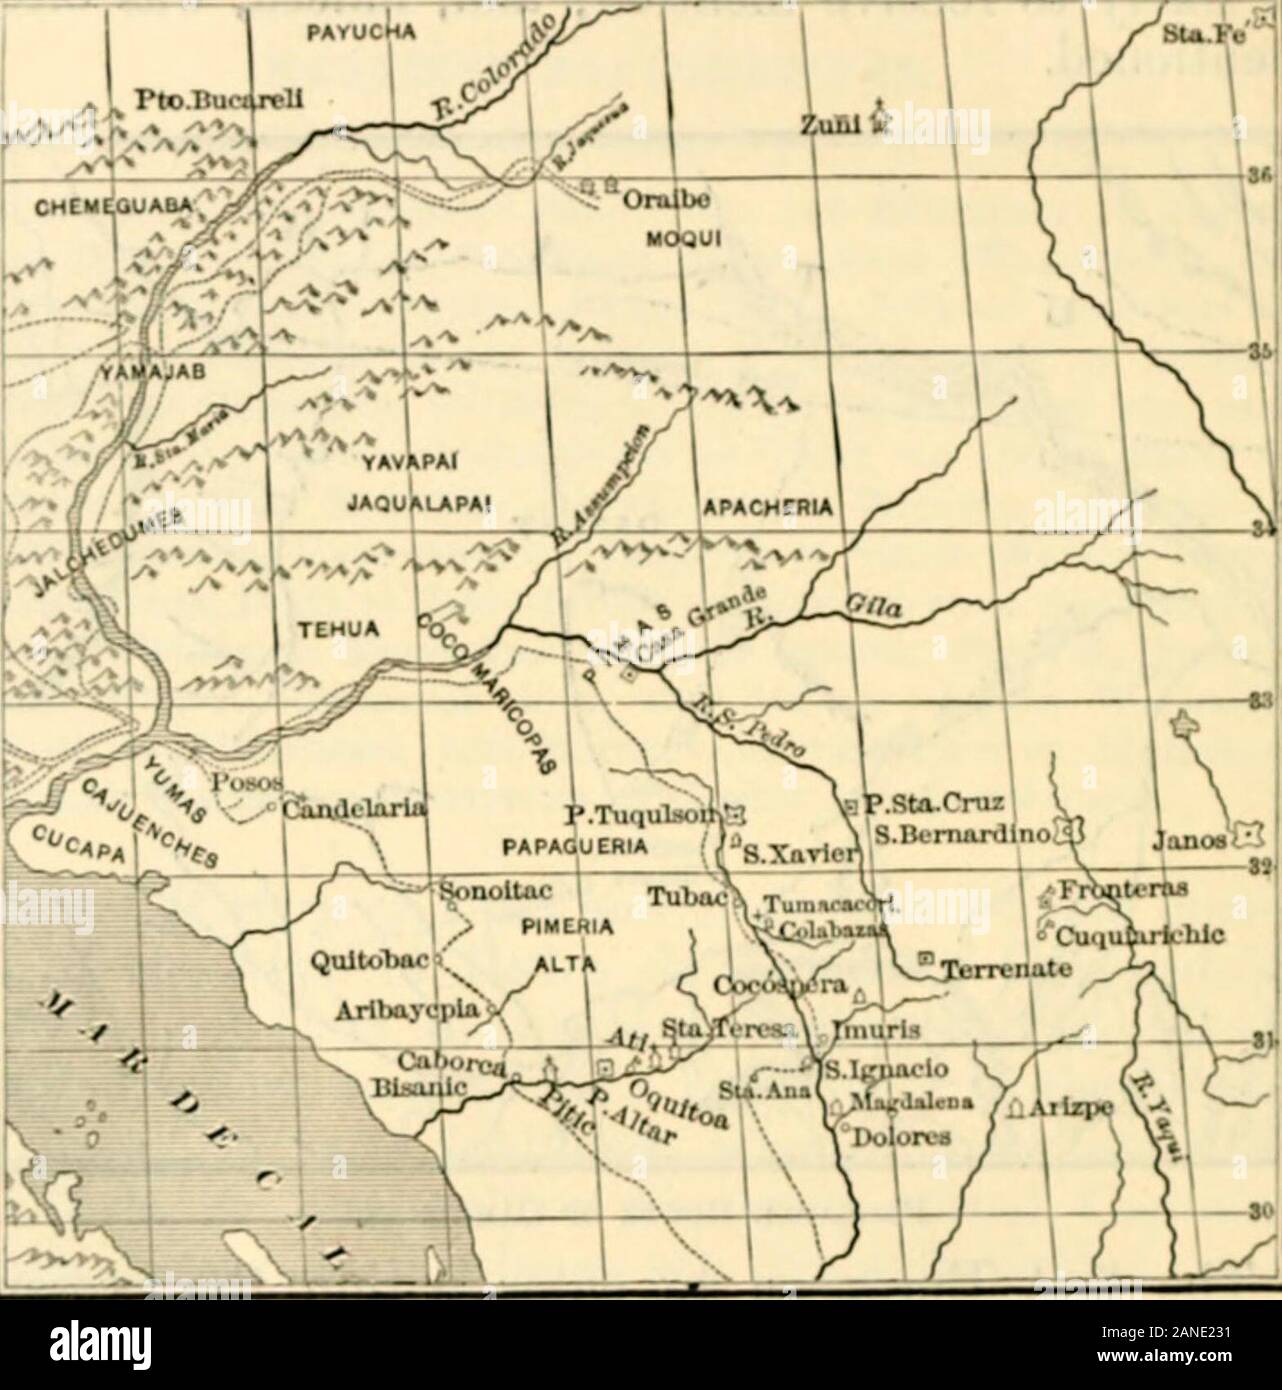 History of Nevada, Colorado, and Wyoming, 1540-1888 . Pkobable Route of Cardenas, The first European to enter within the presentlimits of Nevada of whom we now have knowledge,and without doubt in my mind absolutely the first toenter, was Father Francisco Garces, of the order ofSt Francis, who set out from Sonora in 1775 with aparty under Colonel Anza for California, and whostopped at the junction of the Colorado and Gila toexplore for a mission site. Of the expedition to Cali-fornia was Father Pedro Font who wrote a narrativeof it, and drew a map which included not only his ^ EARLIEST EXPLORAT Stock Photo